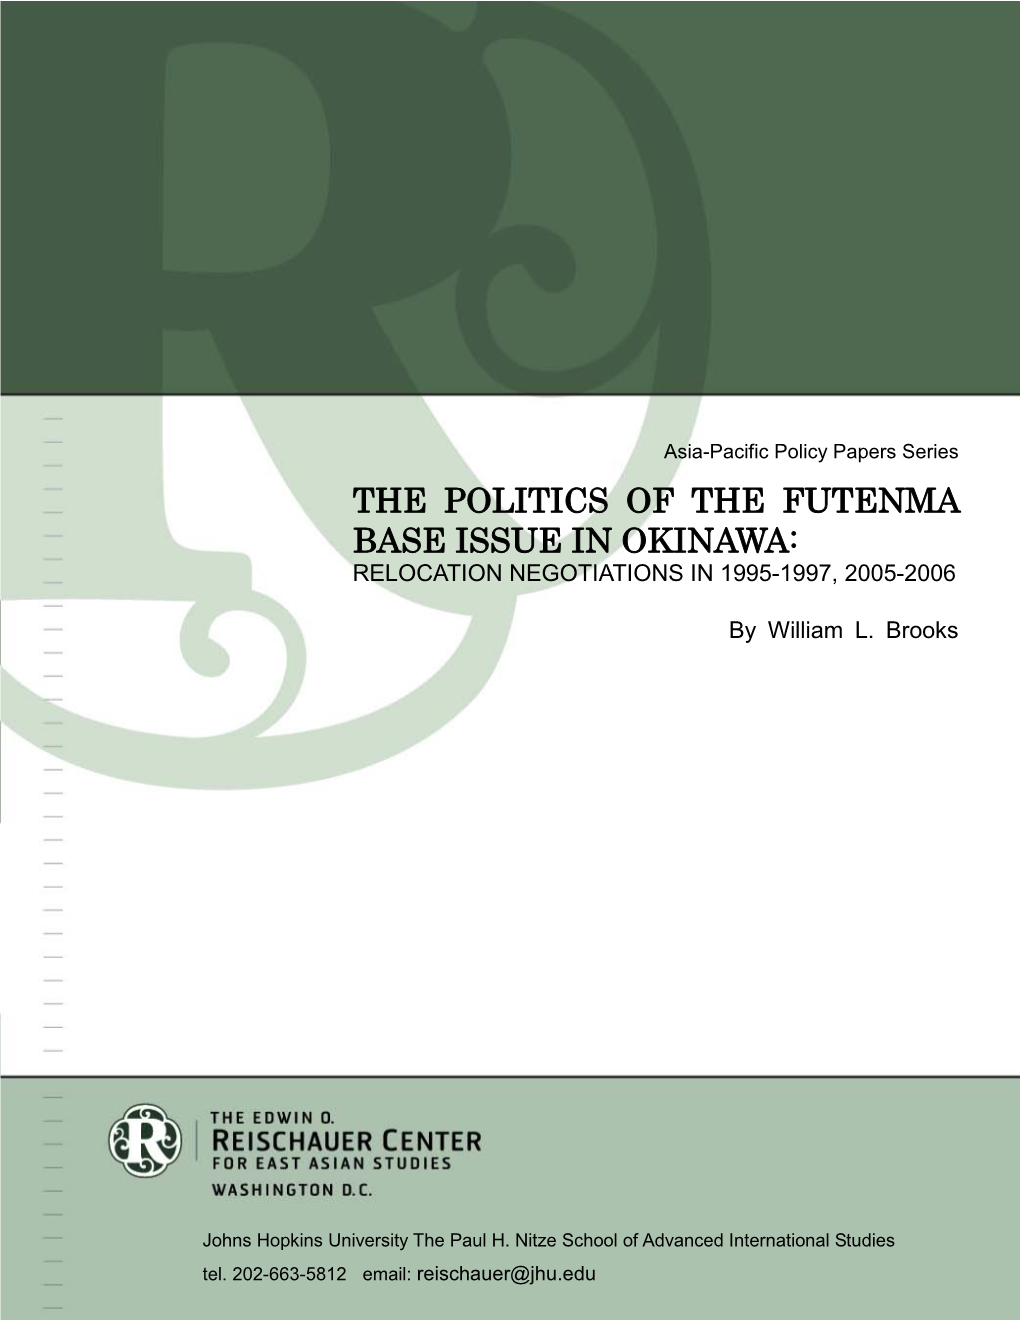 The Politics of the Futenma Base Issue in Okinawa: Relocation Negotiations in 1995-1997, 2005-2006